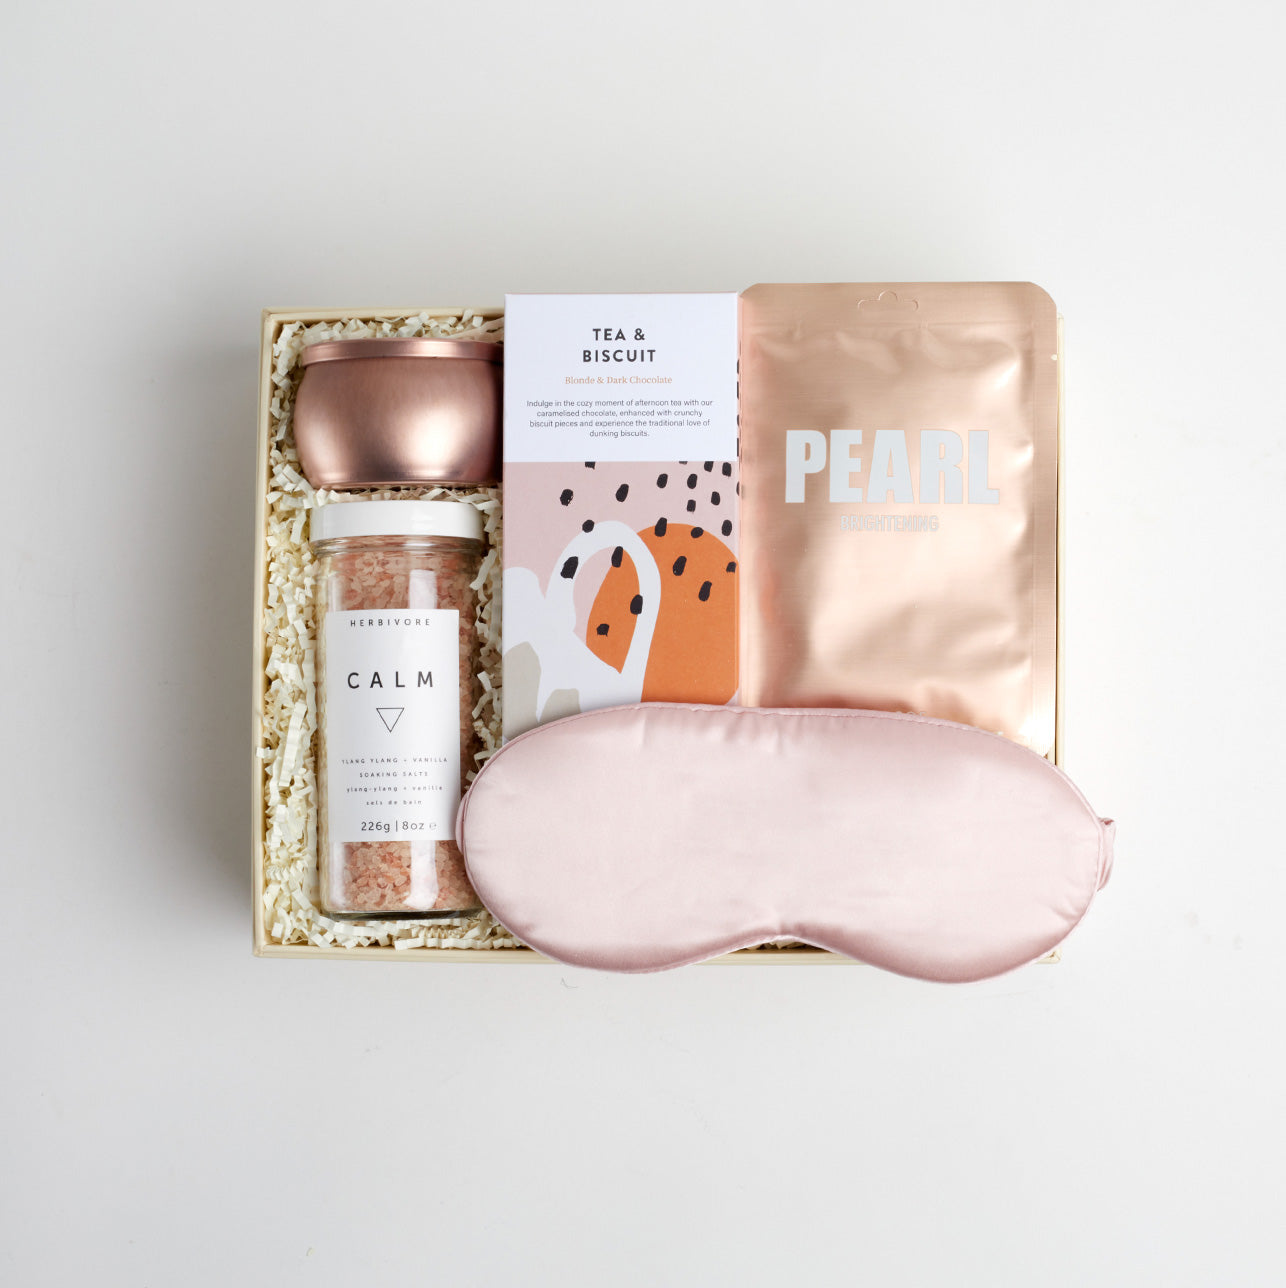 BOXFOX Creme Gift Box filled with Azeria Pink Silk Sleep Mask, Herbivore Botanicals Calm Bath Salts, Voluspa Prosecco Rose Candle, Lapcos Pearl Sheet Mask and The Chocolate Society Chocolate Bar